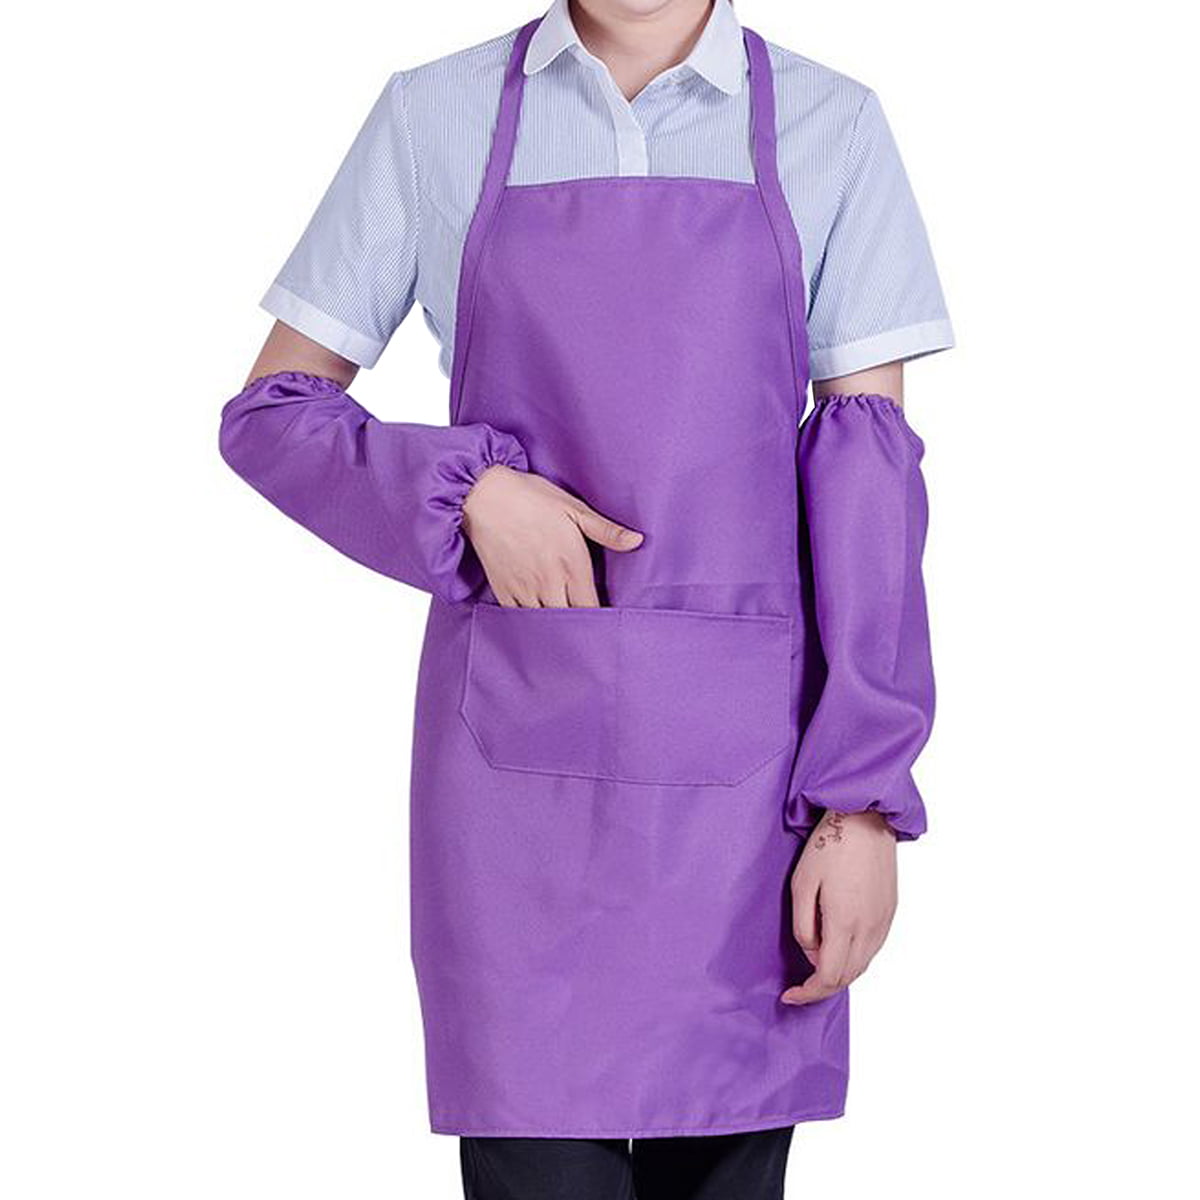 Plain Tabard Apron Overall Kitchen Catering Cleaning Work wear 